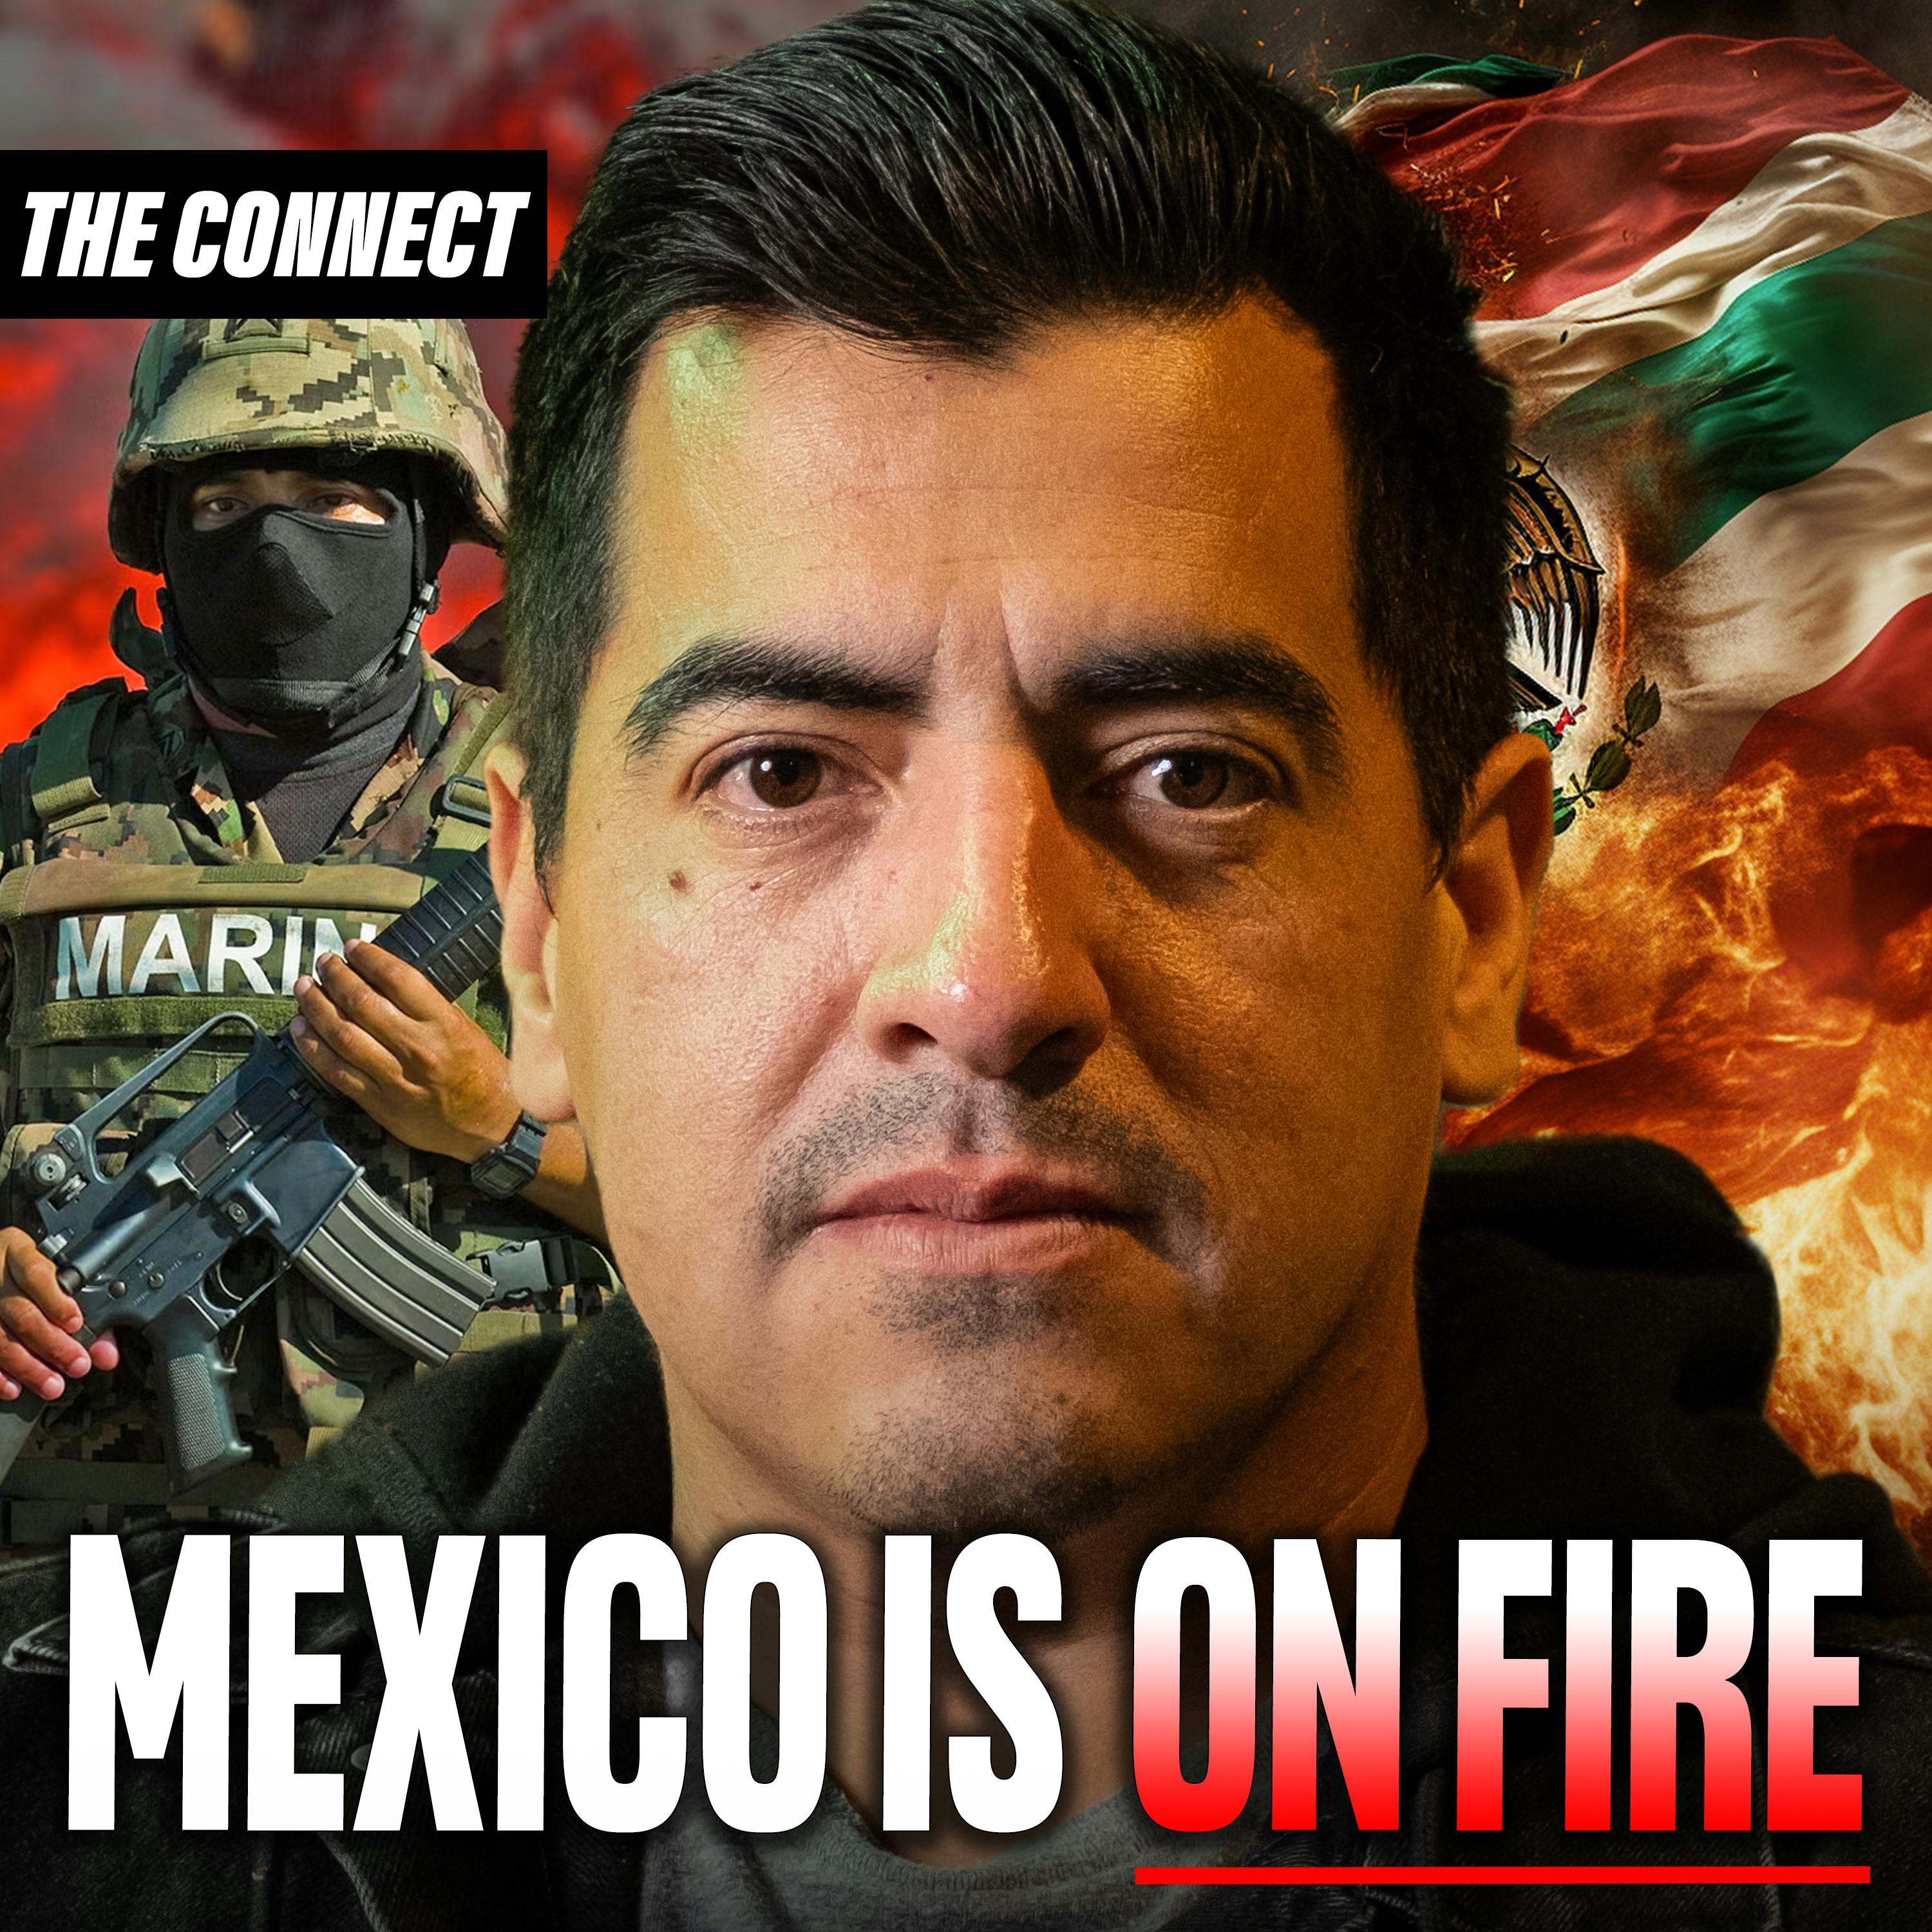 A Mexican Undercover Cop Reveals The HORRORS Of Cartel Violence, Surviving The War In Tijuana